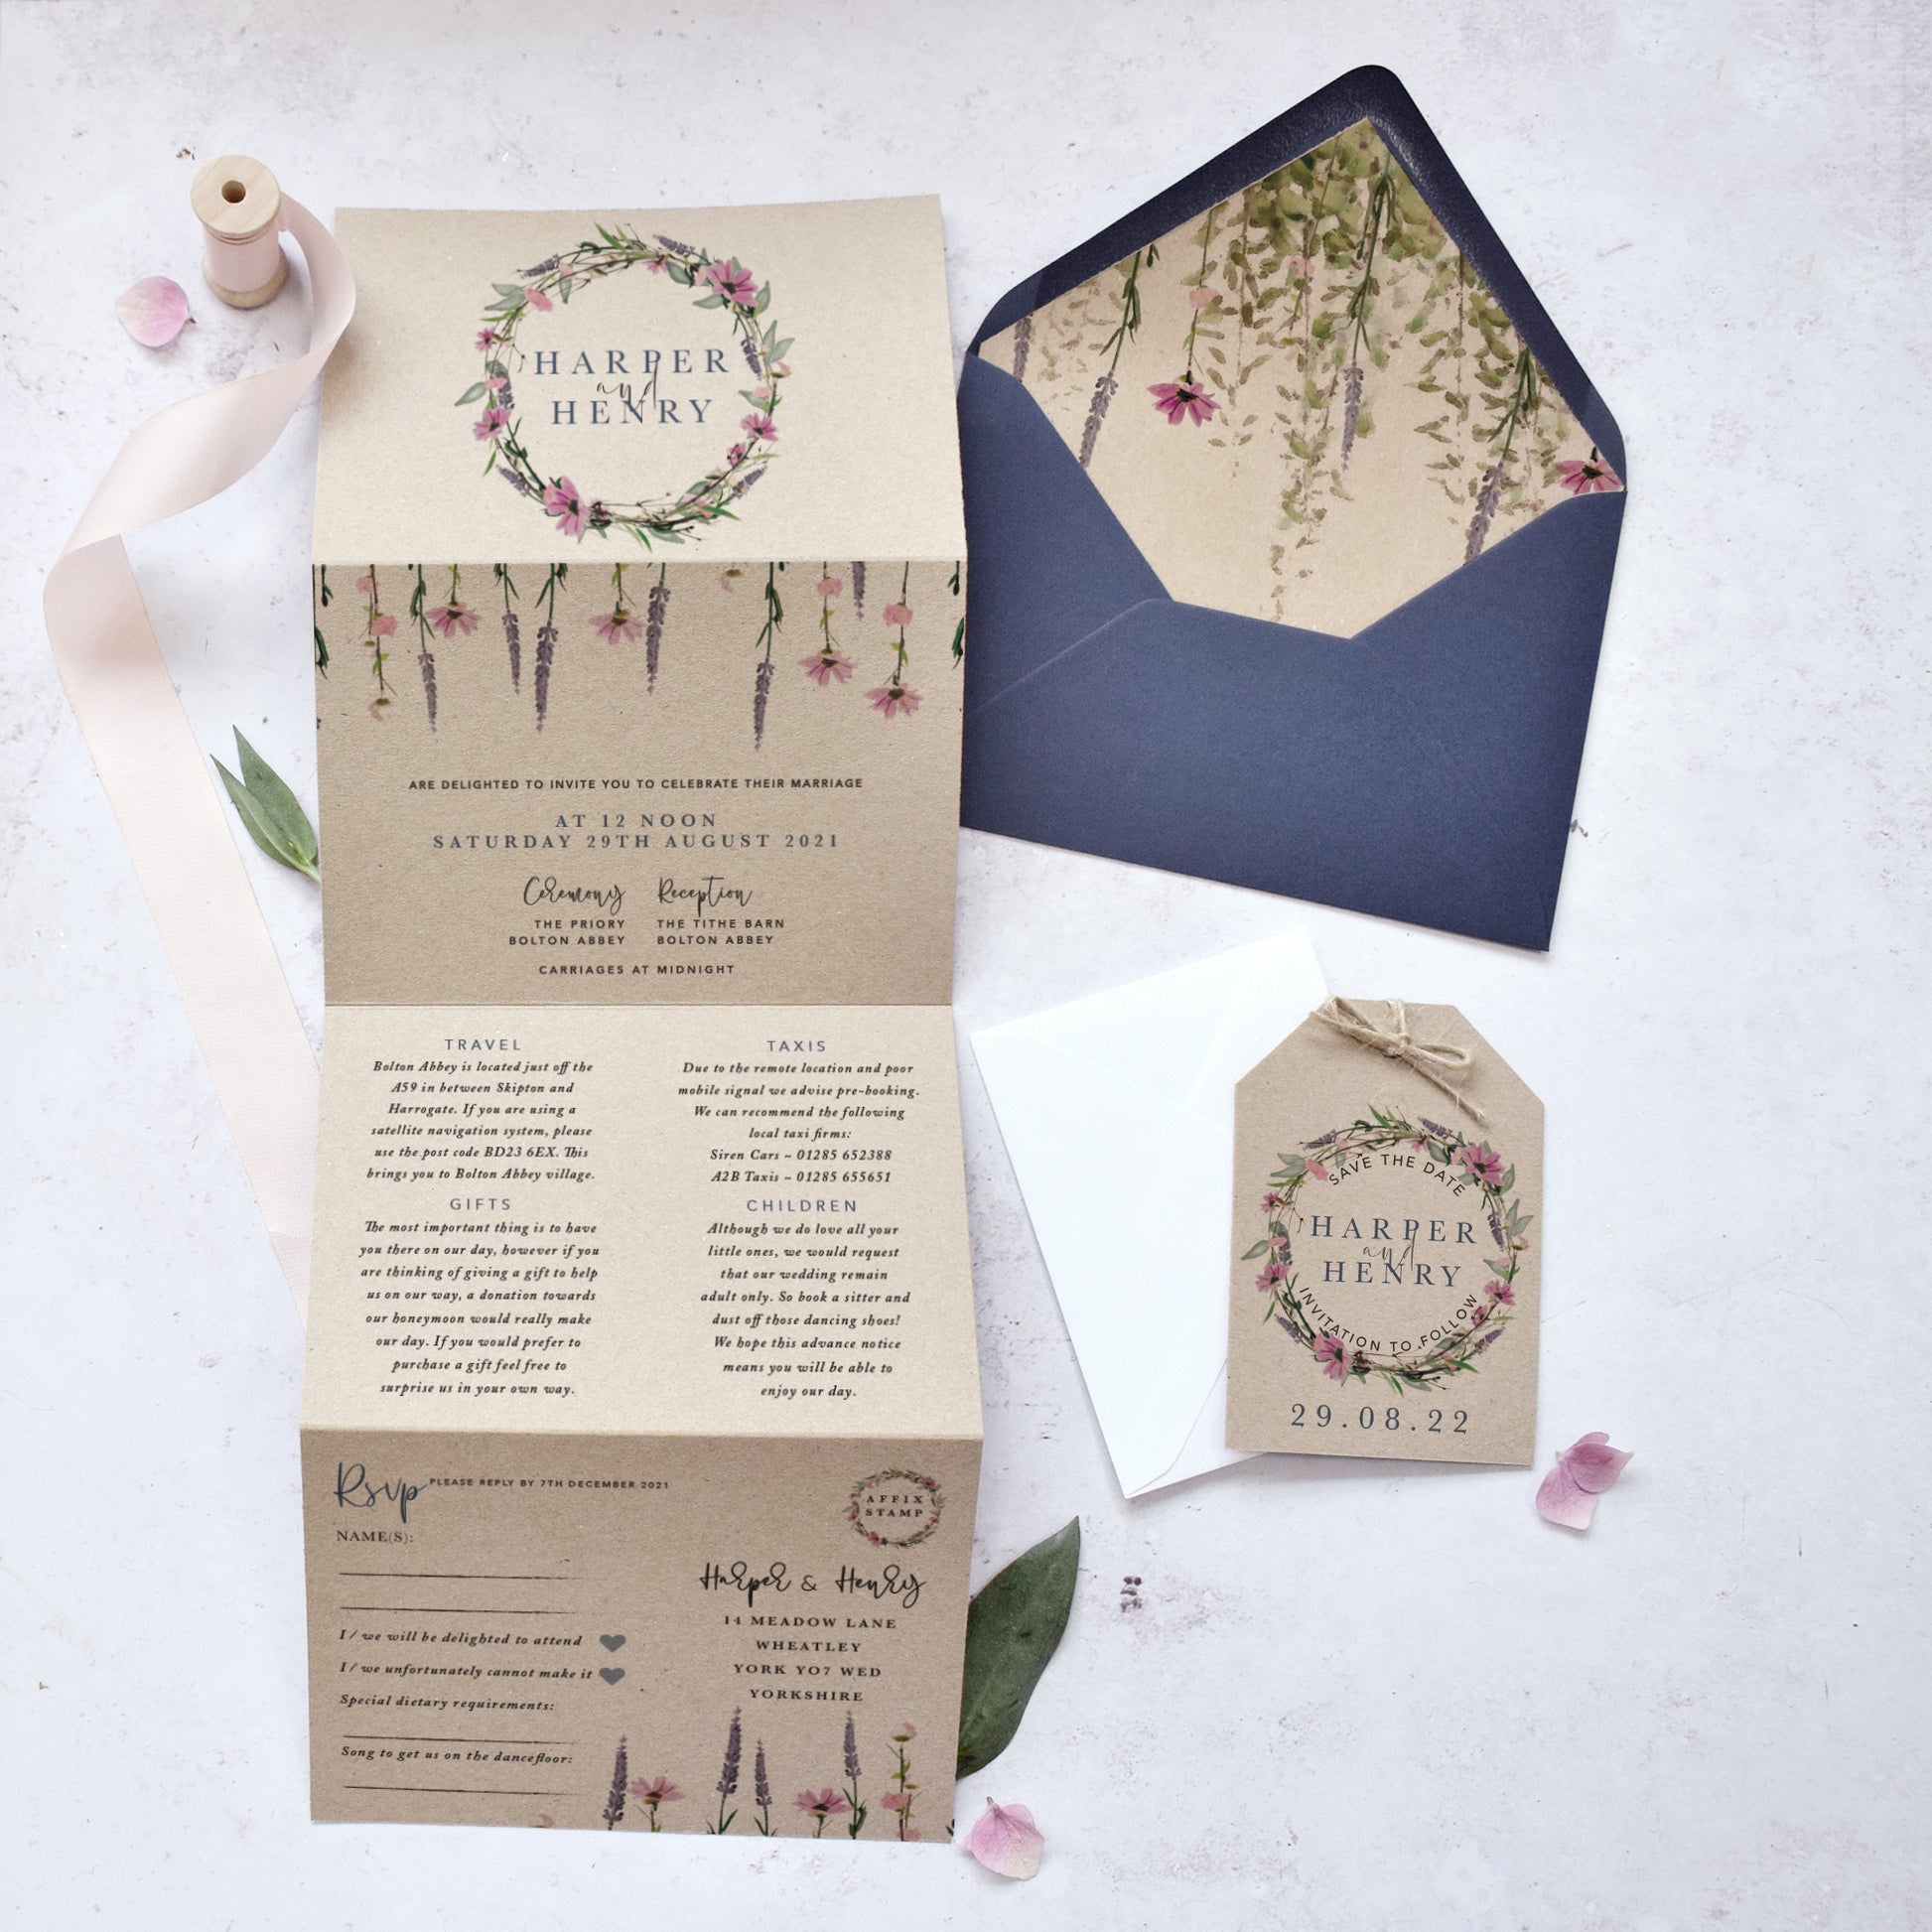 Rustic invitations from our "whisper kraft' collection